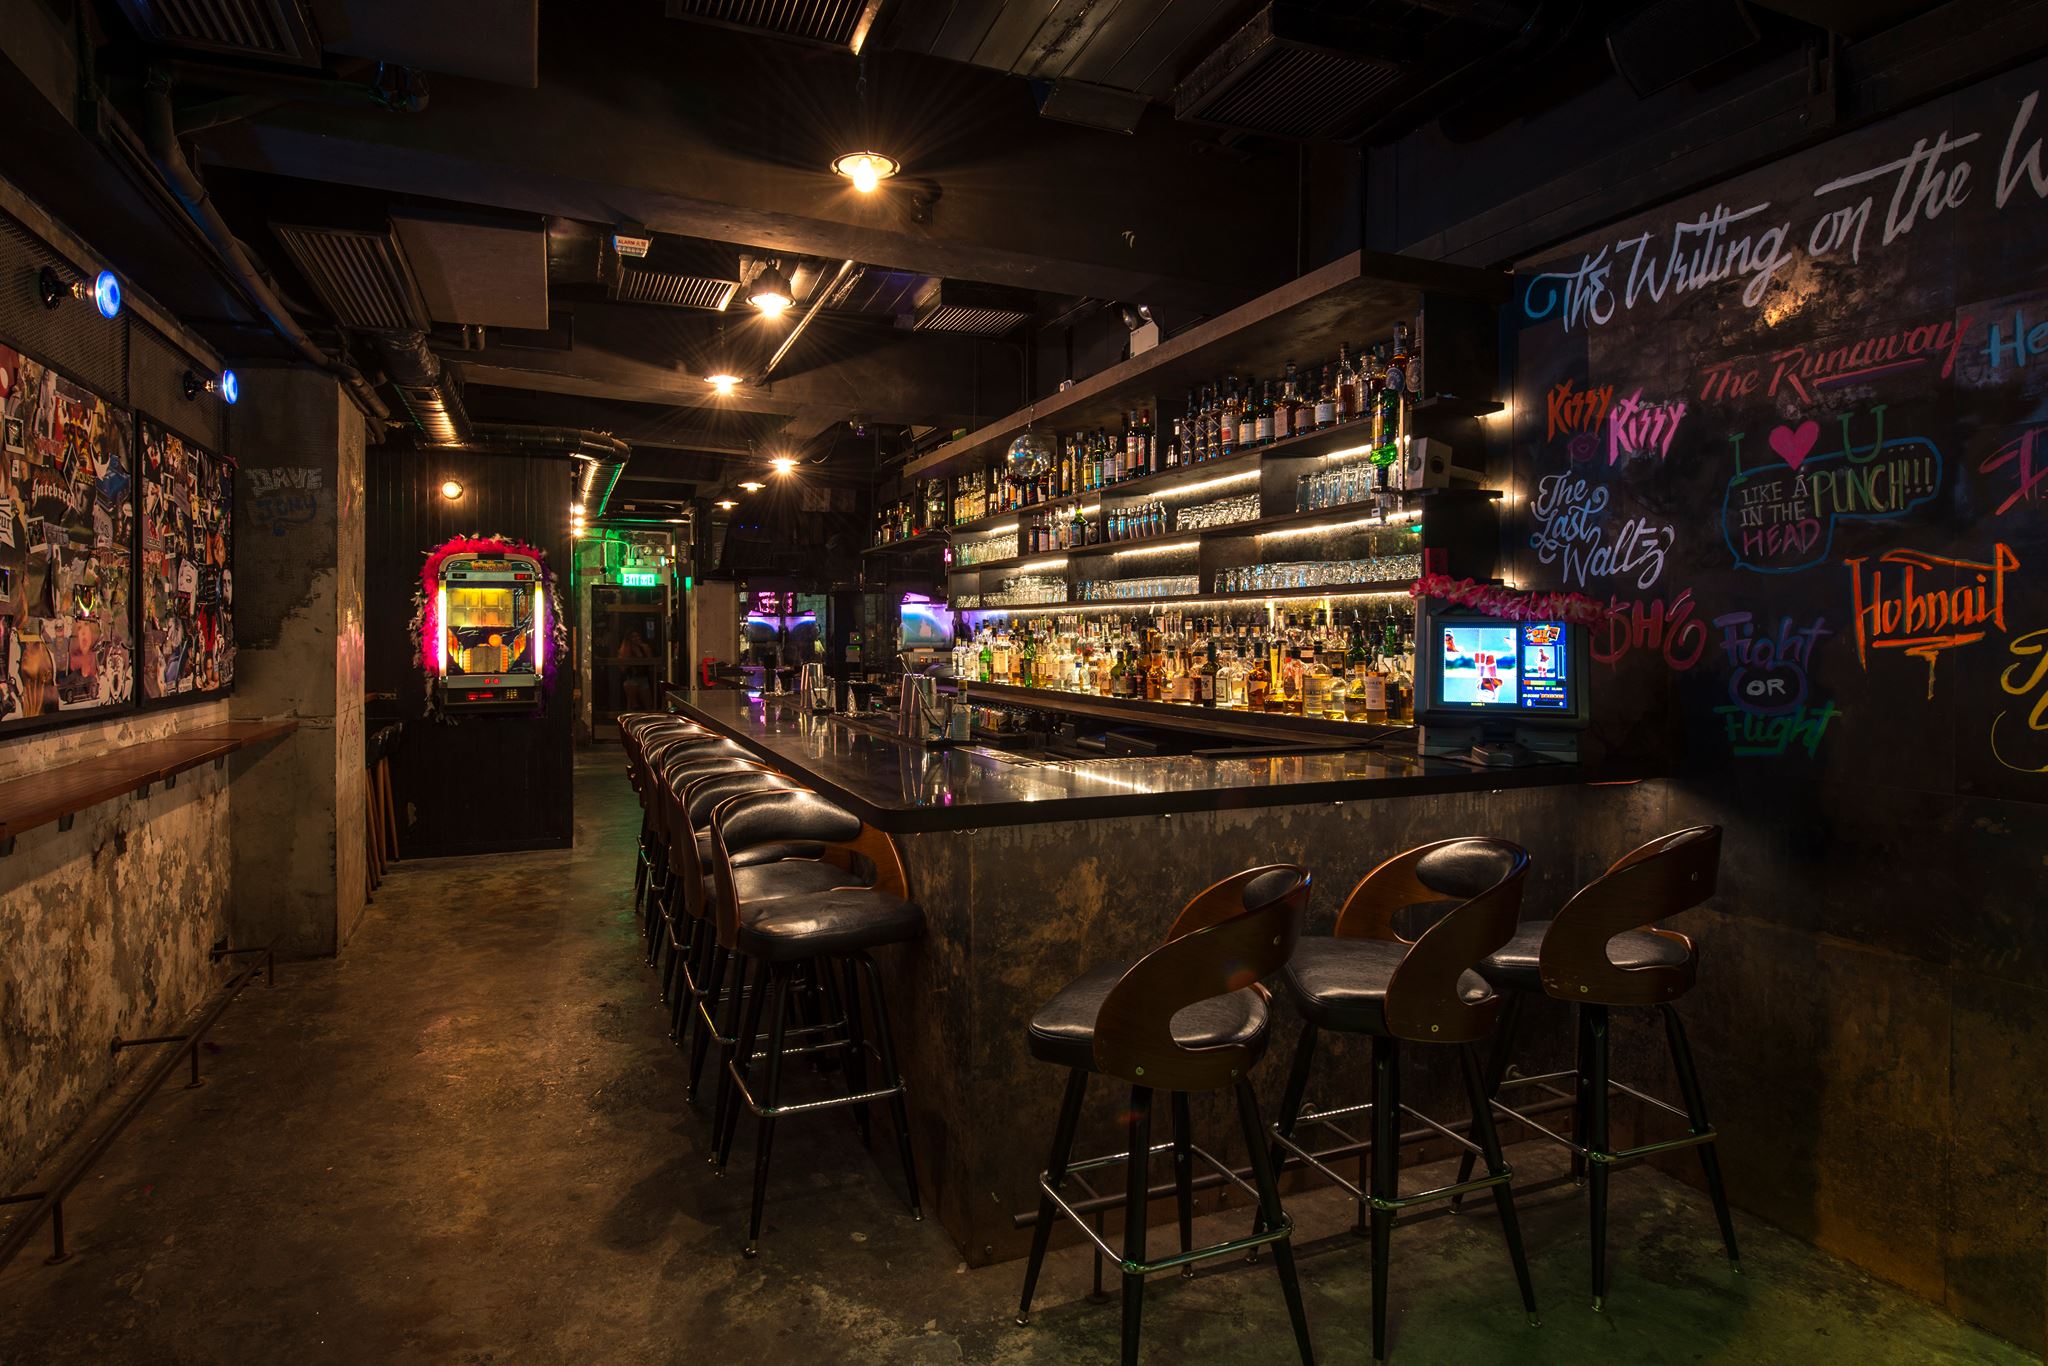 One of Hong Kong’s coolest dive bars, The Pontiac, is popping up in Mumbai